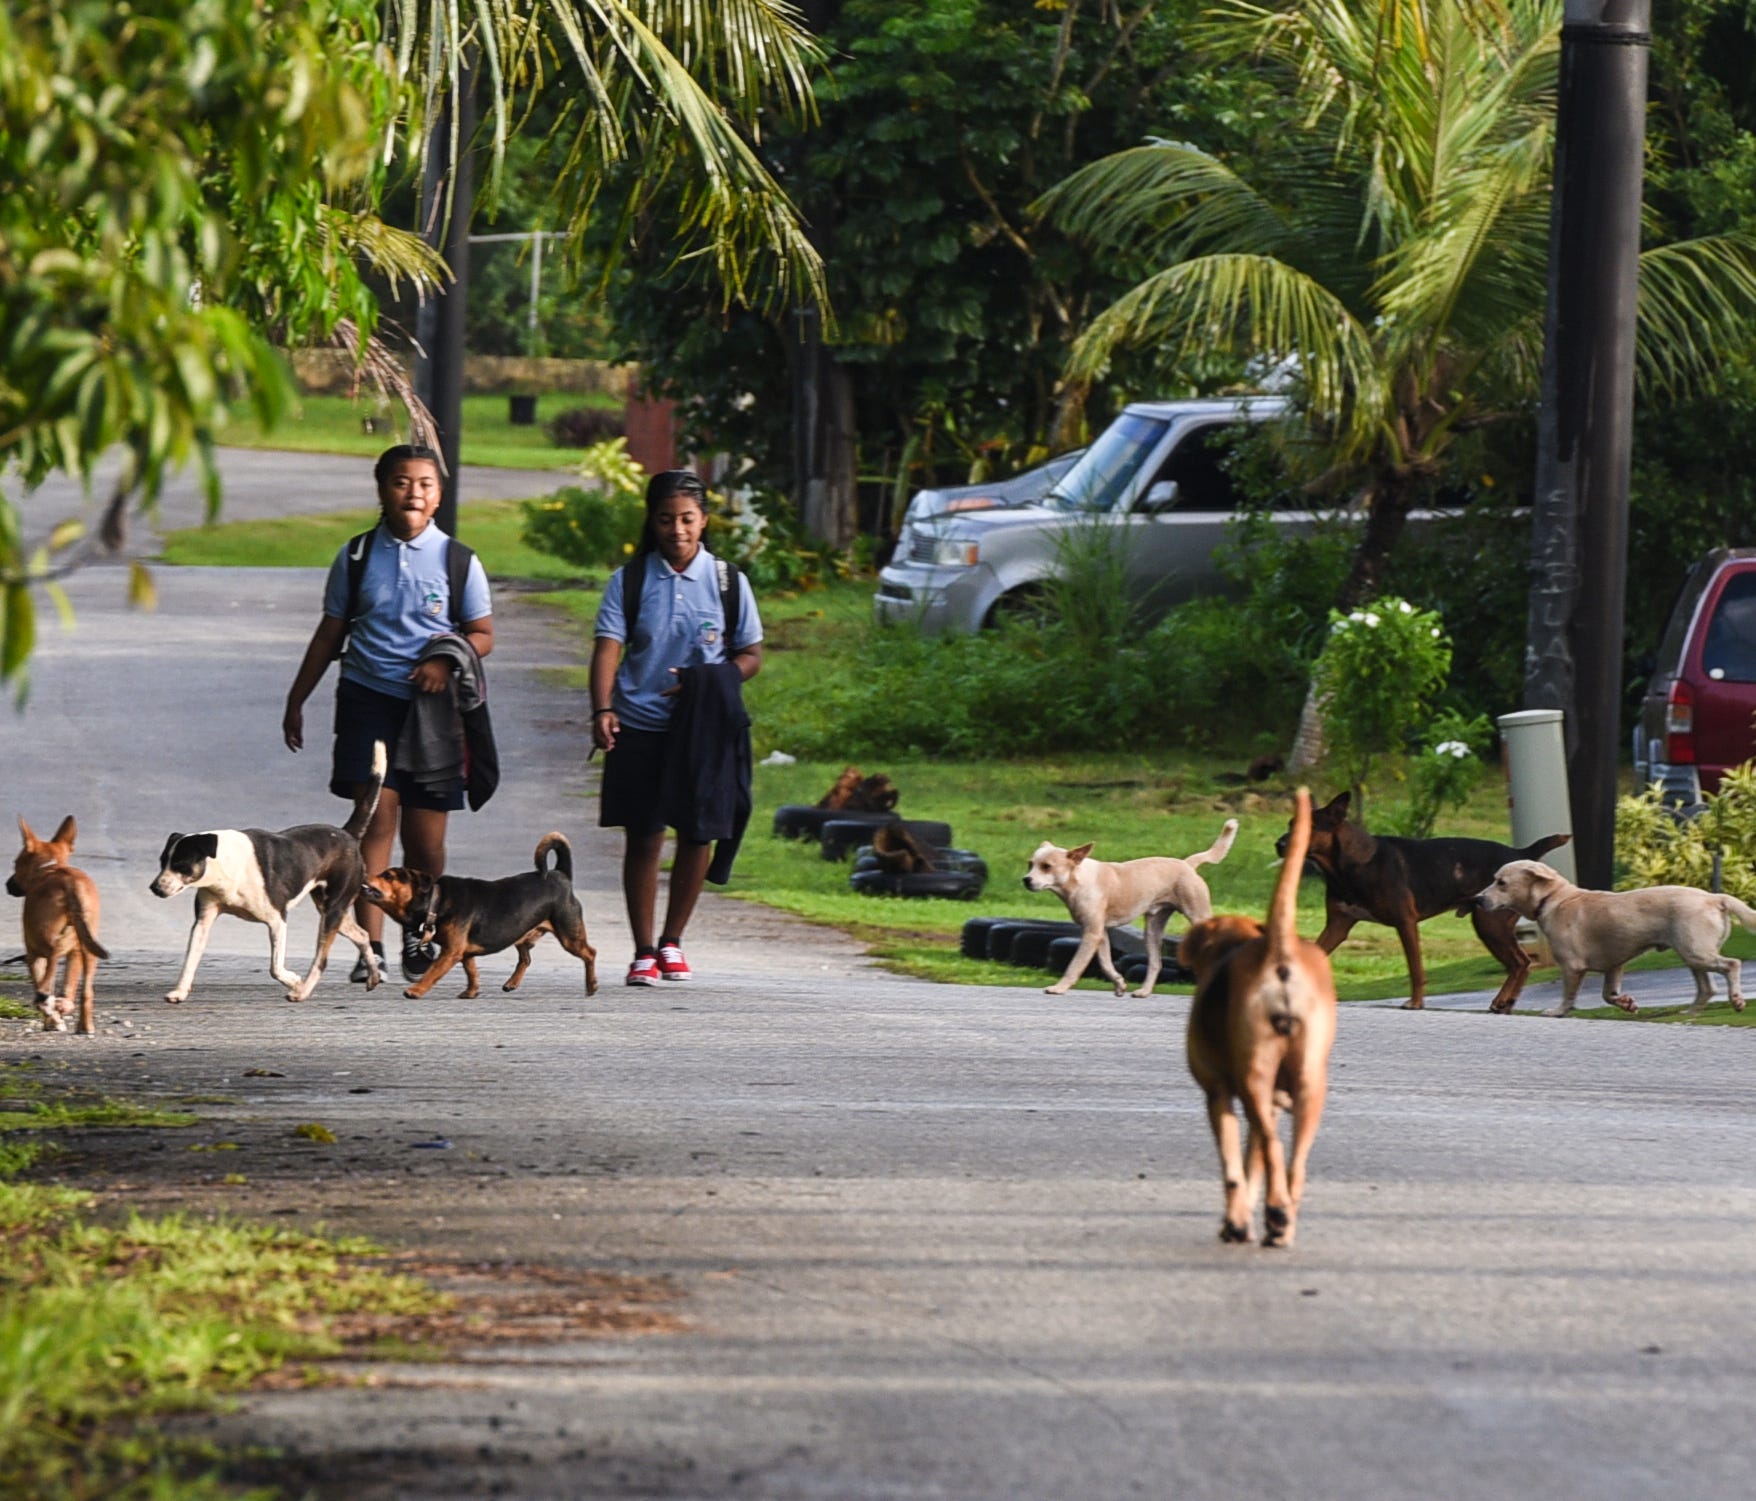 Benavente Middle School students Maemae Songeni, left, and Diara Eseuk, are approached by unleashed dogs as they walk down Chalan Bumuchacha in Dededo on Wednesday, Oct. 11, 2017. The girls did say that there are times that they are harrassed by the 